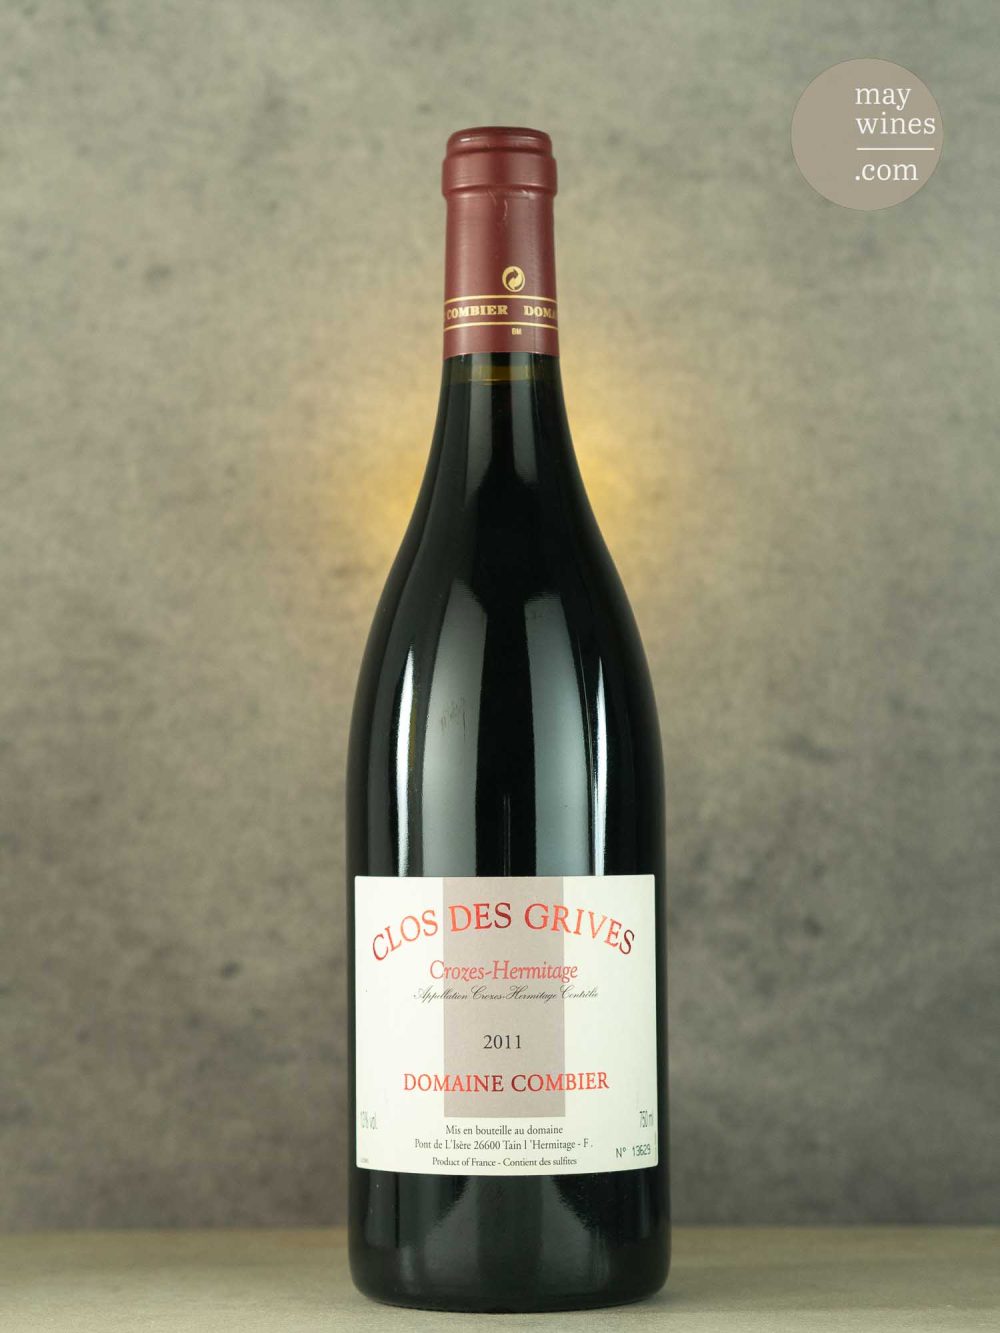 May Wines – Rotwein – 2011 Clos des Grives - Domaine Combier